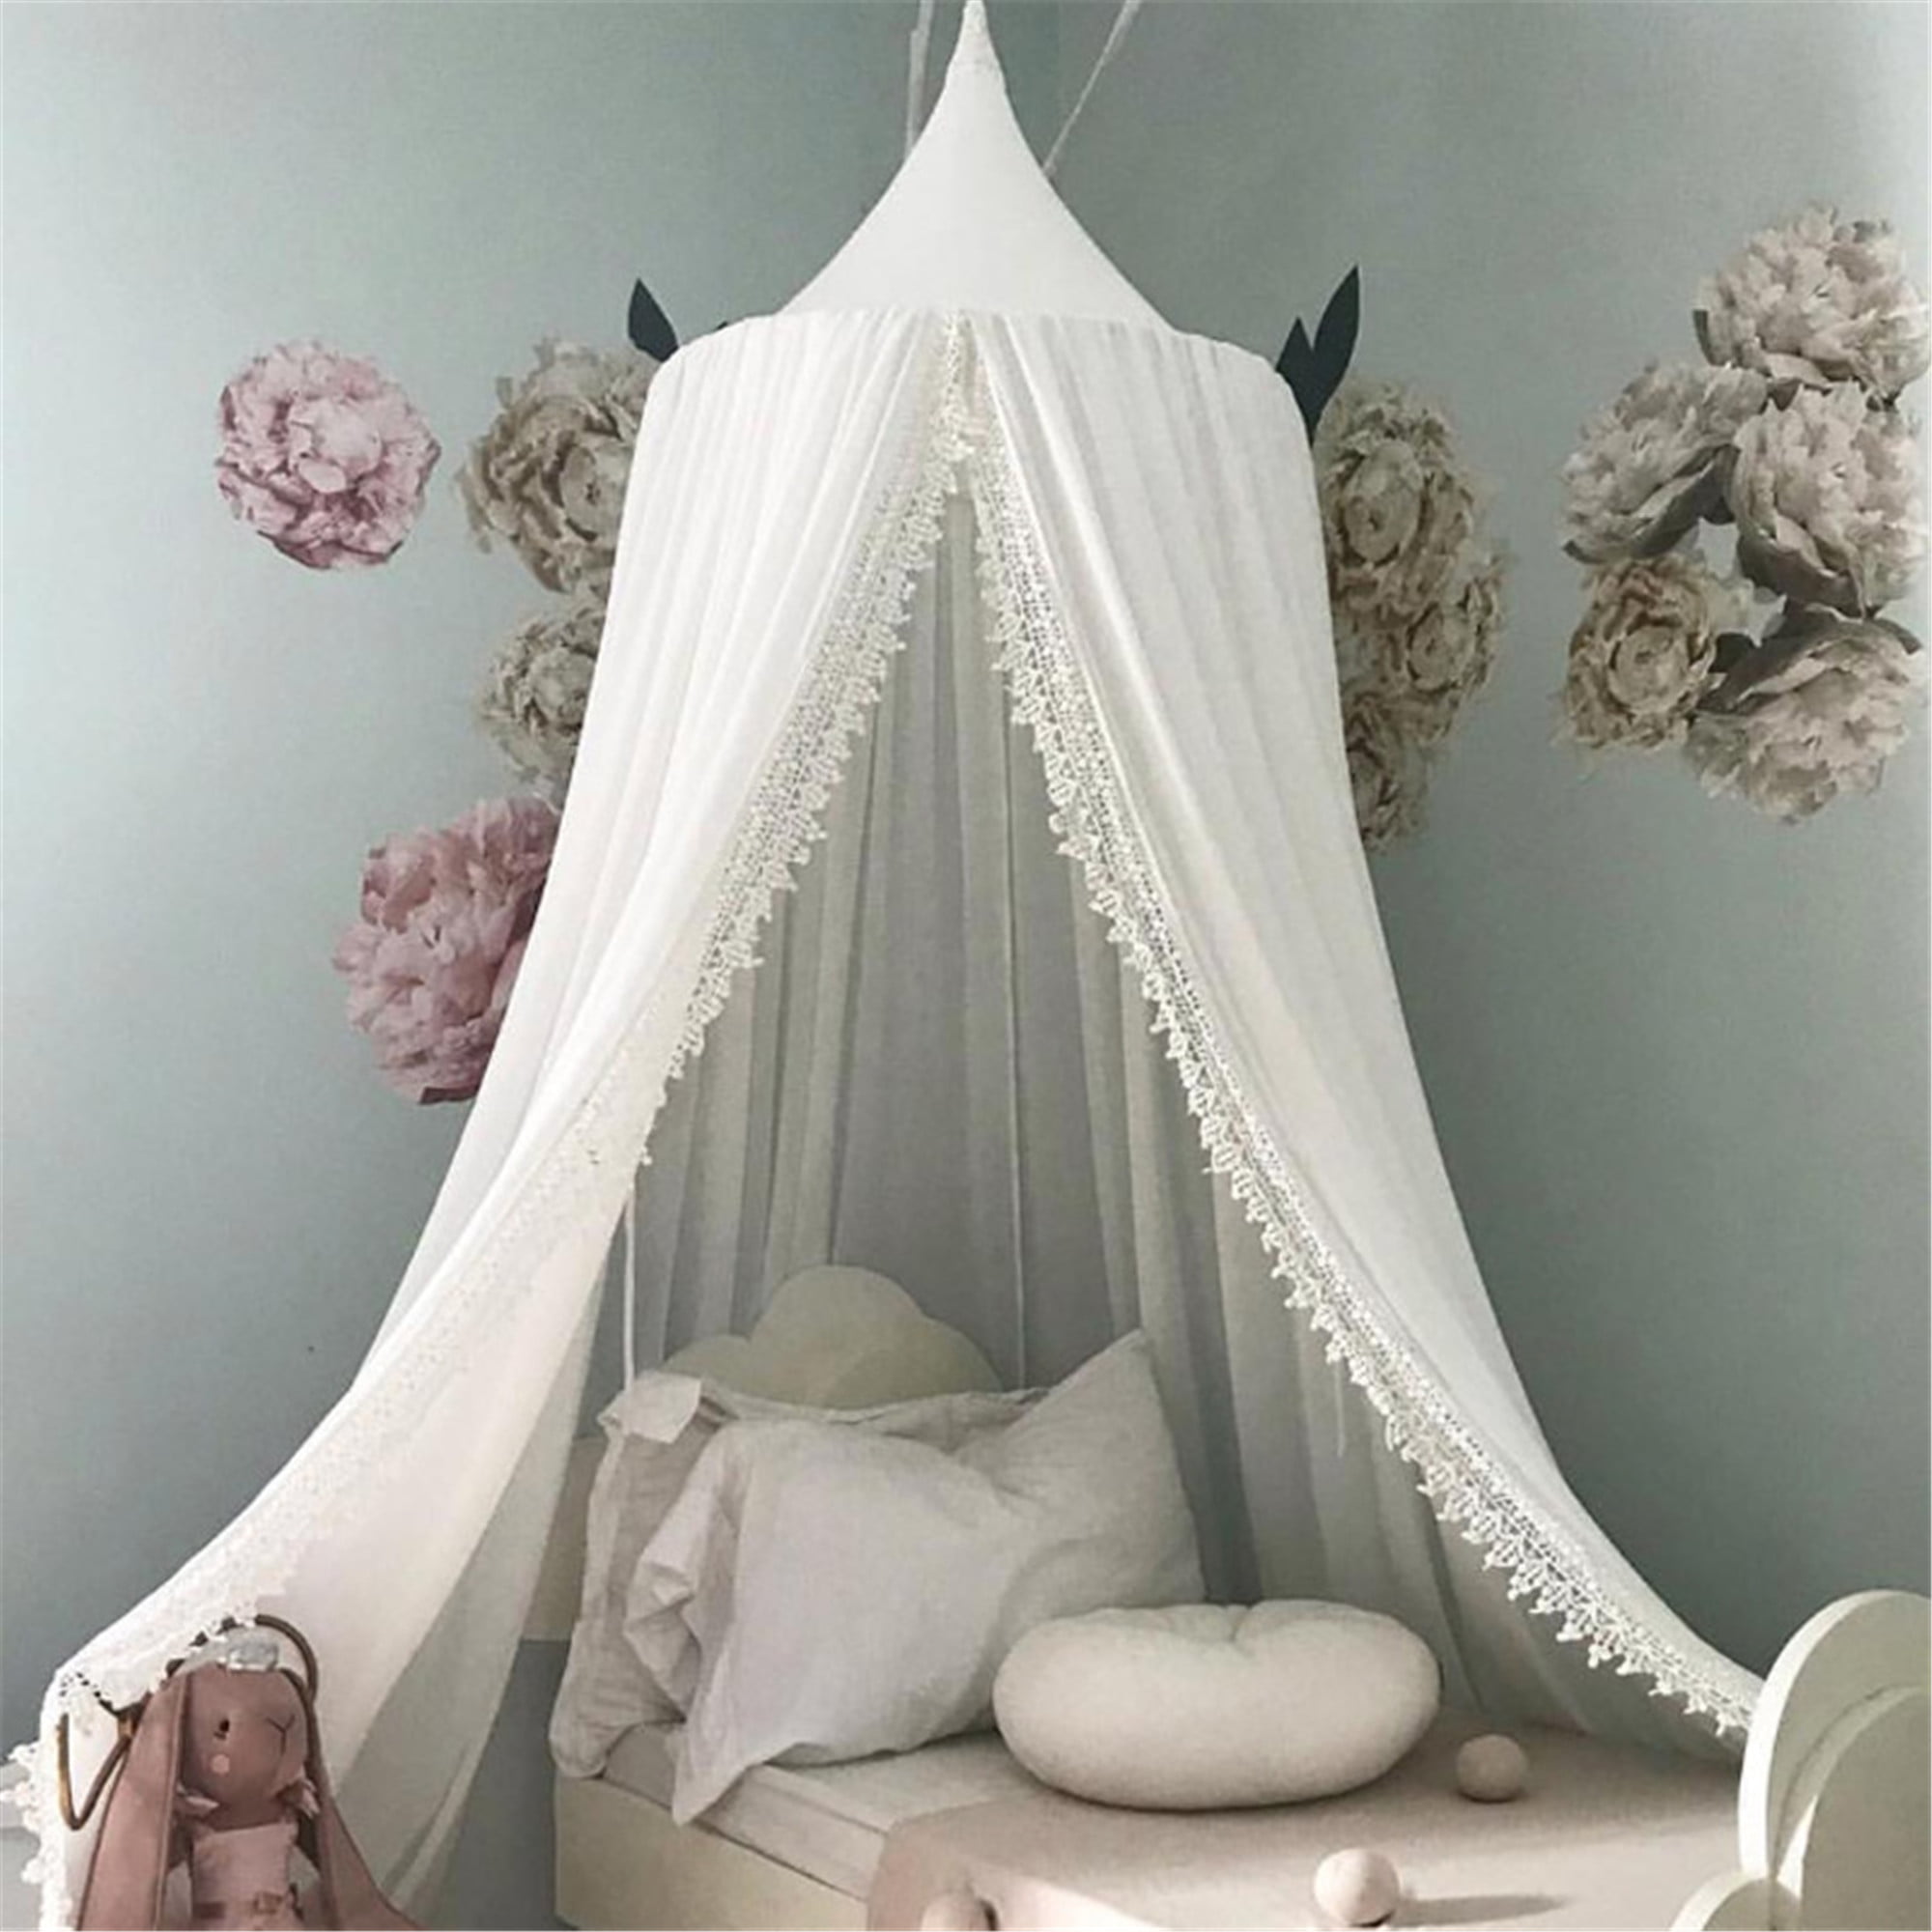 Samber Mosquito Net Bed Canopy Play Tent Bedding for Kids Playing Children Round Lace Dome Netting Curtains Bed Mantle Baby Boys Girls Games House Khaki